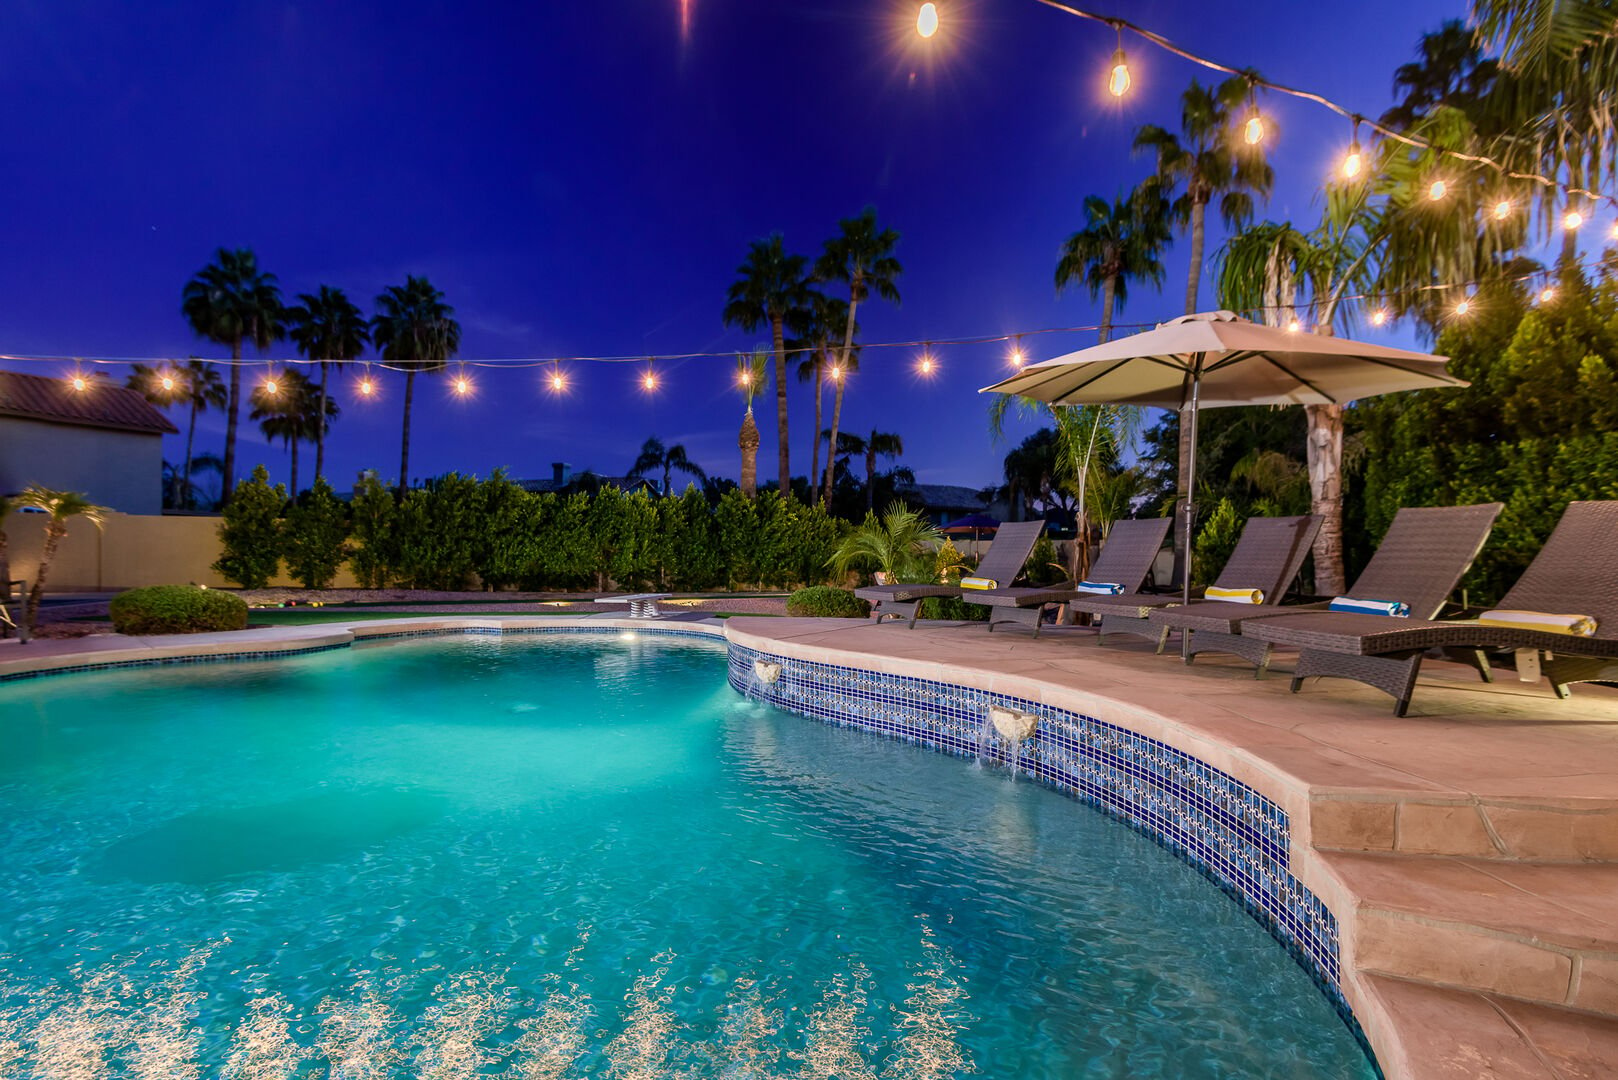 Vacation Rentals in Scottsdale with a Private Pool